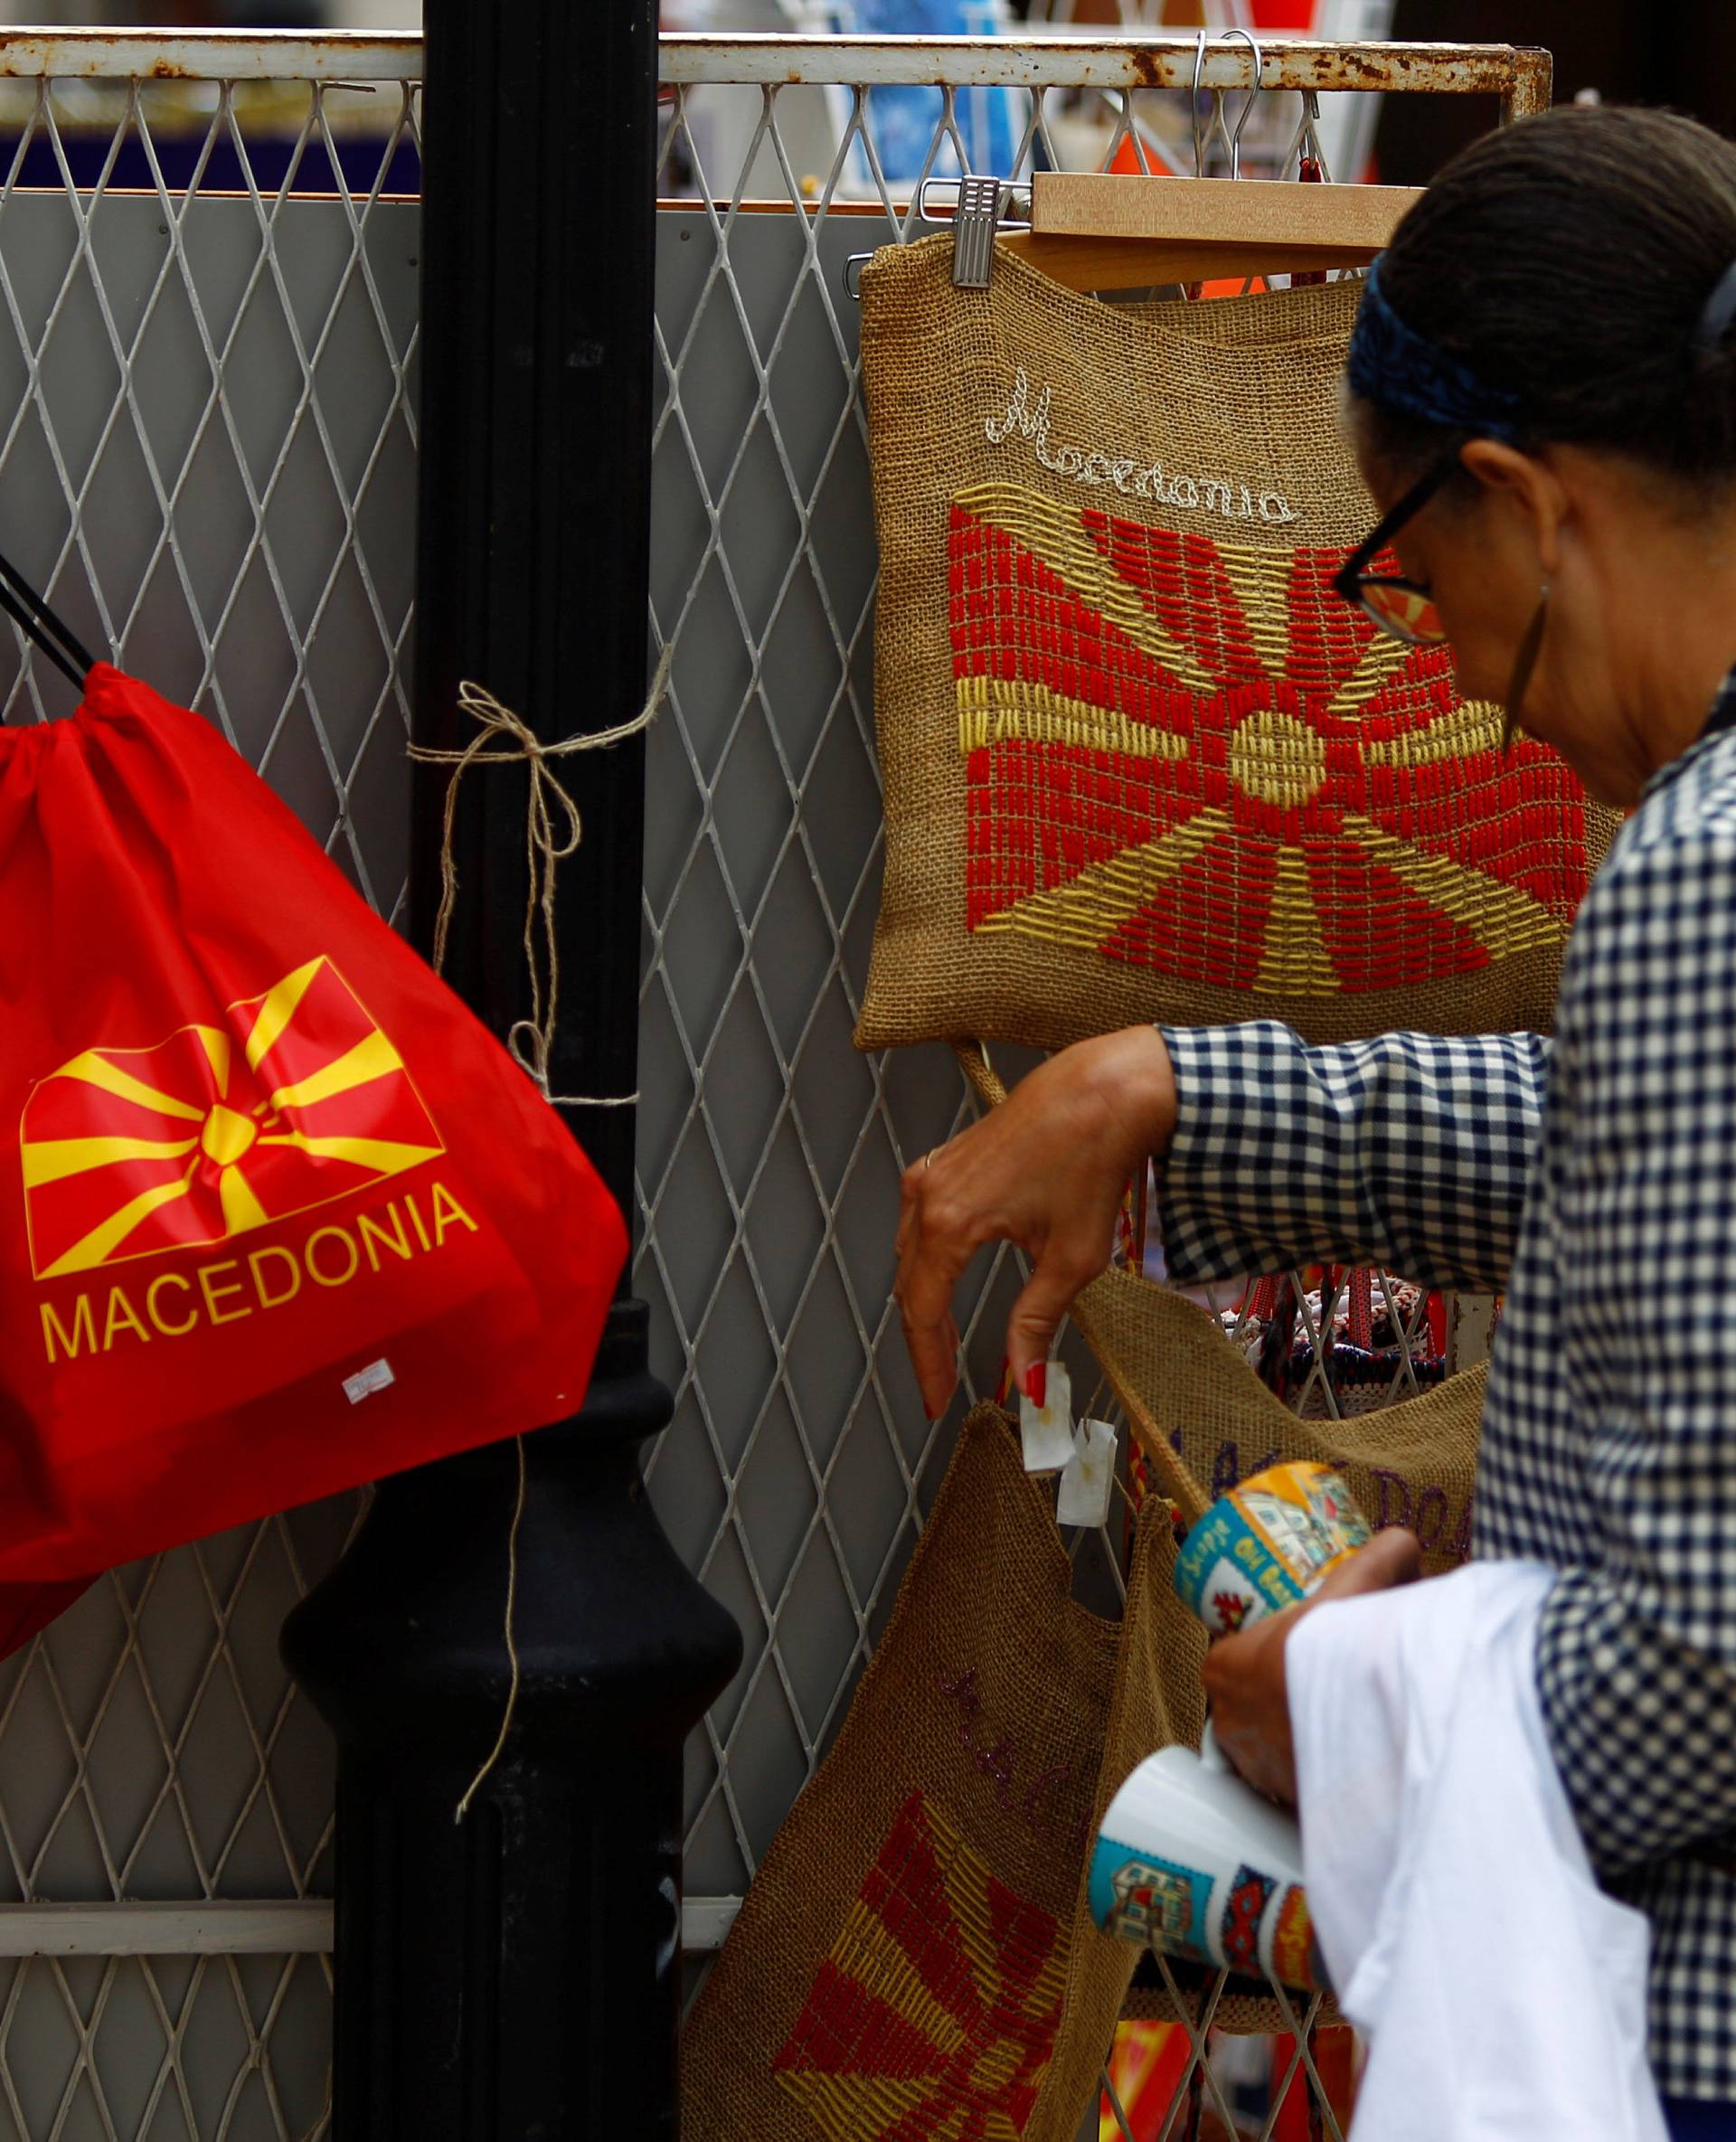 Tourists look at souvenirs with Macedonian flag on at the Old Bazar in Skopje